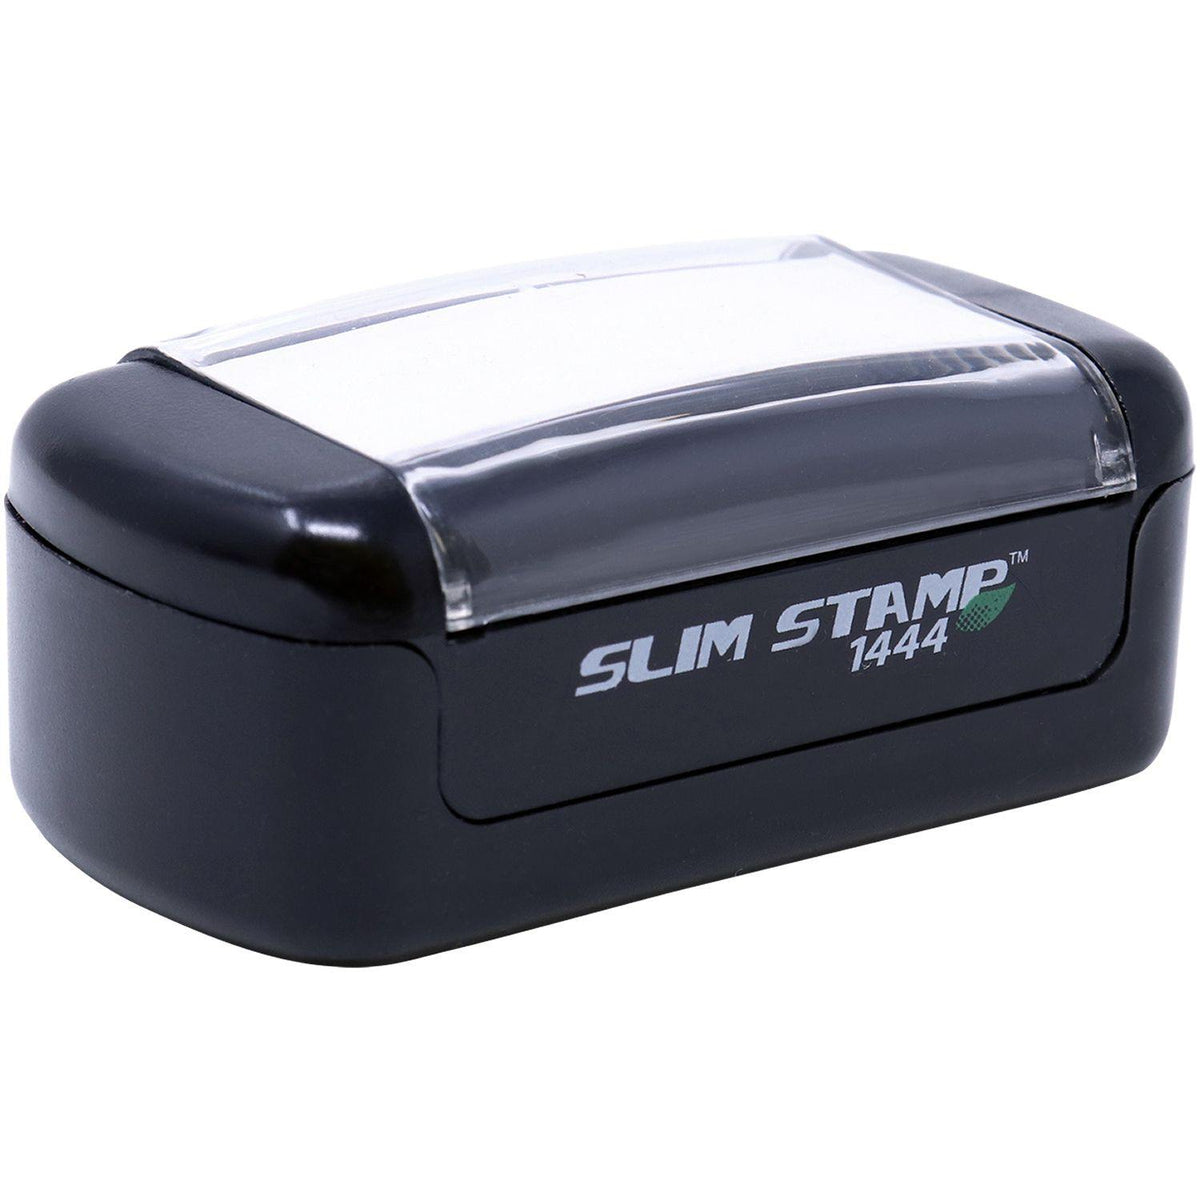 Alt View of Slim Pre-Inked Covid-19 Stamp Mount Angle